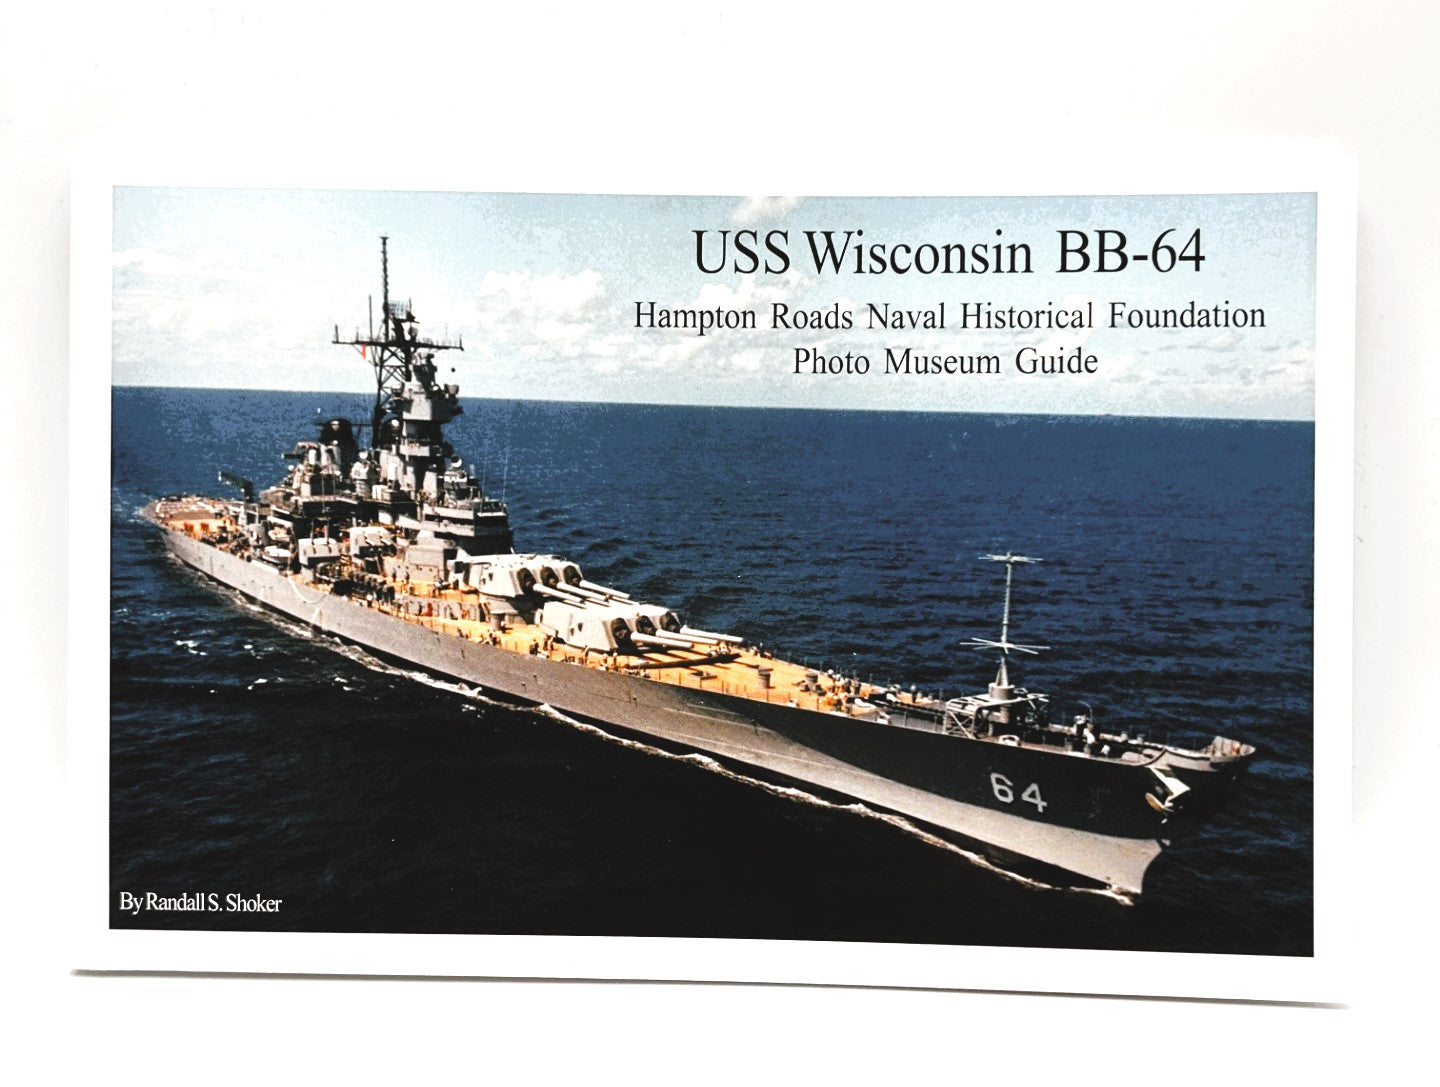 USS Wisconsin BB-64 Photo Guide